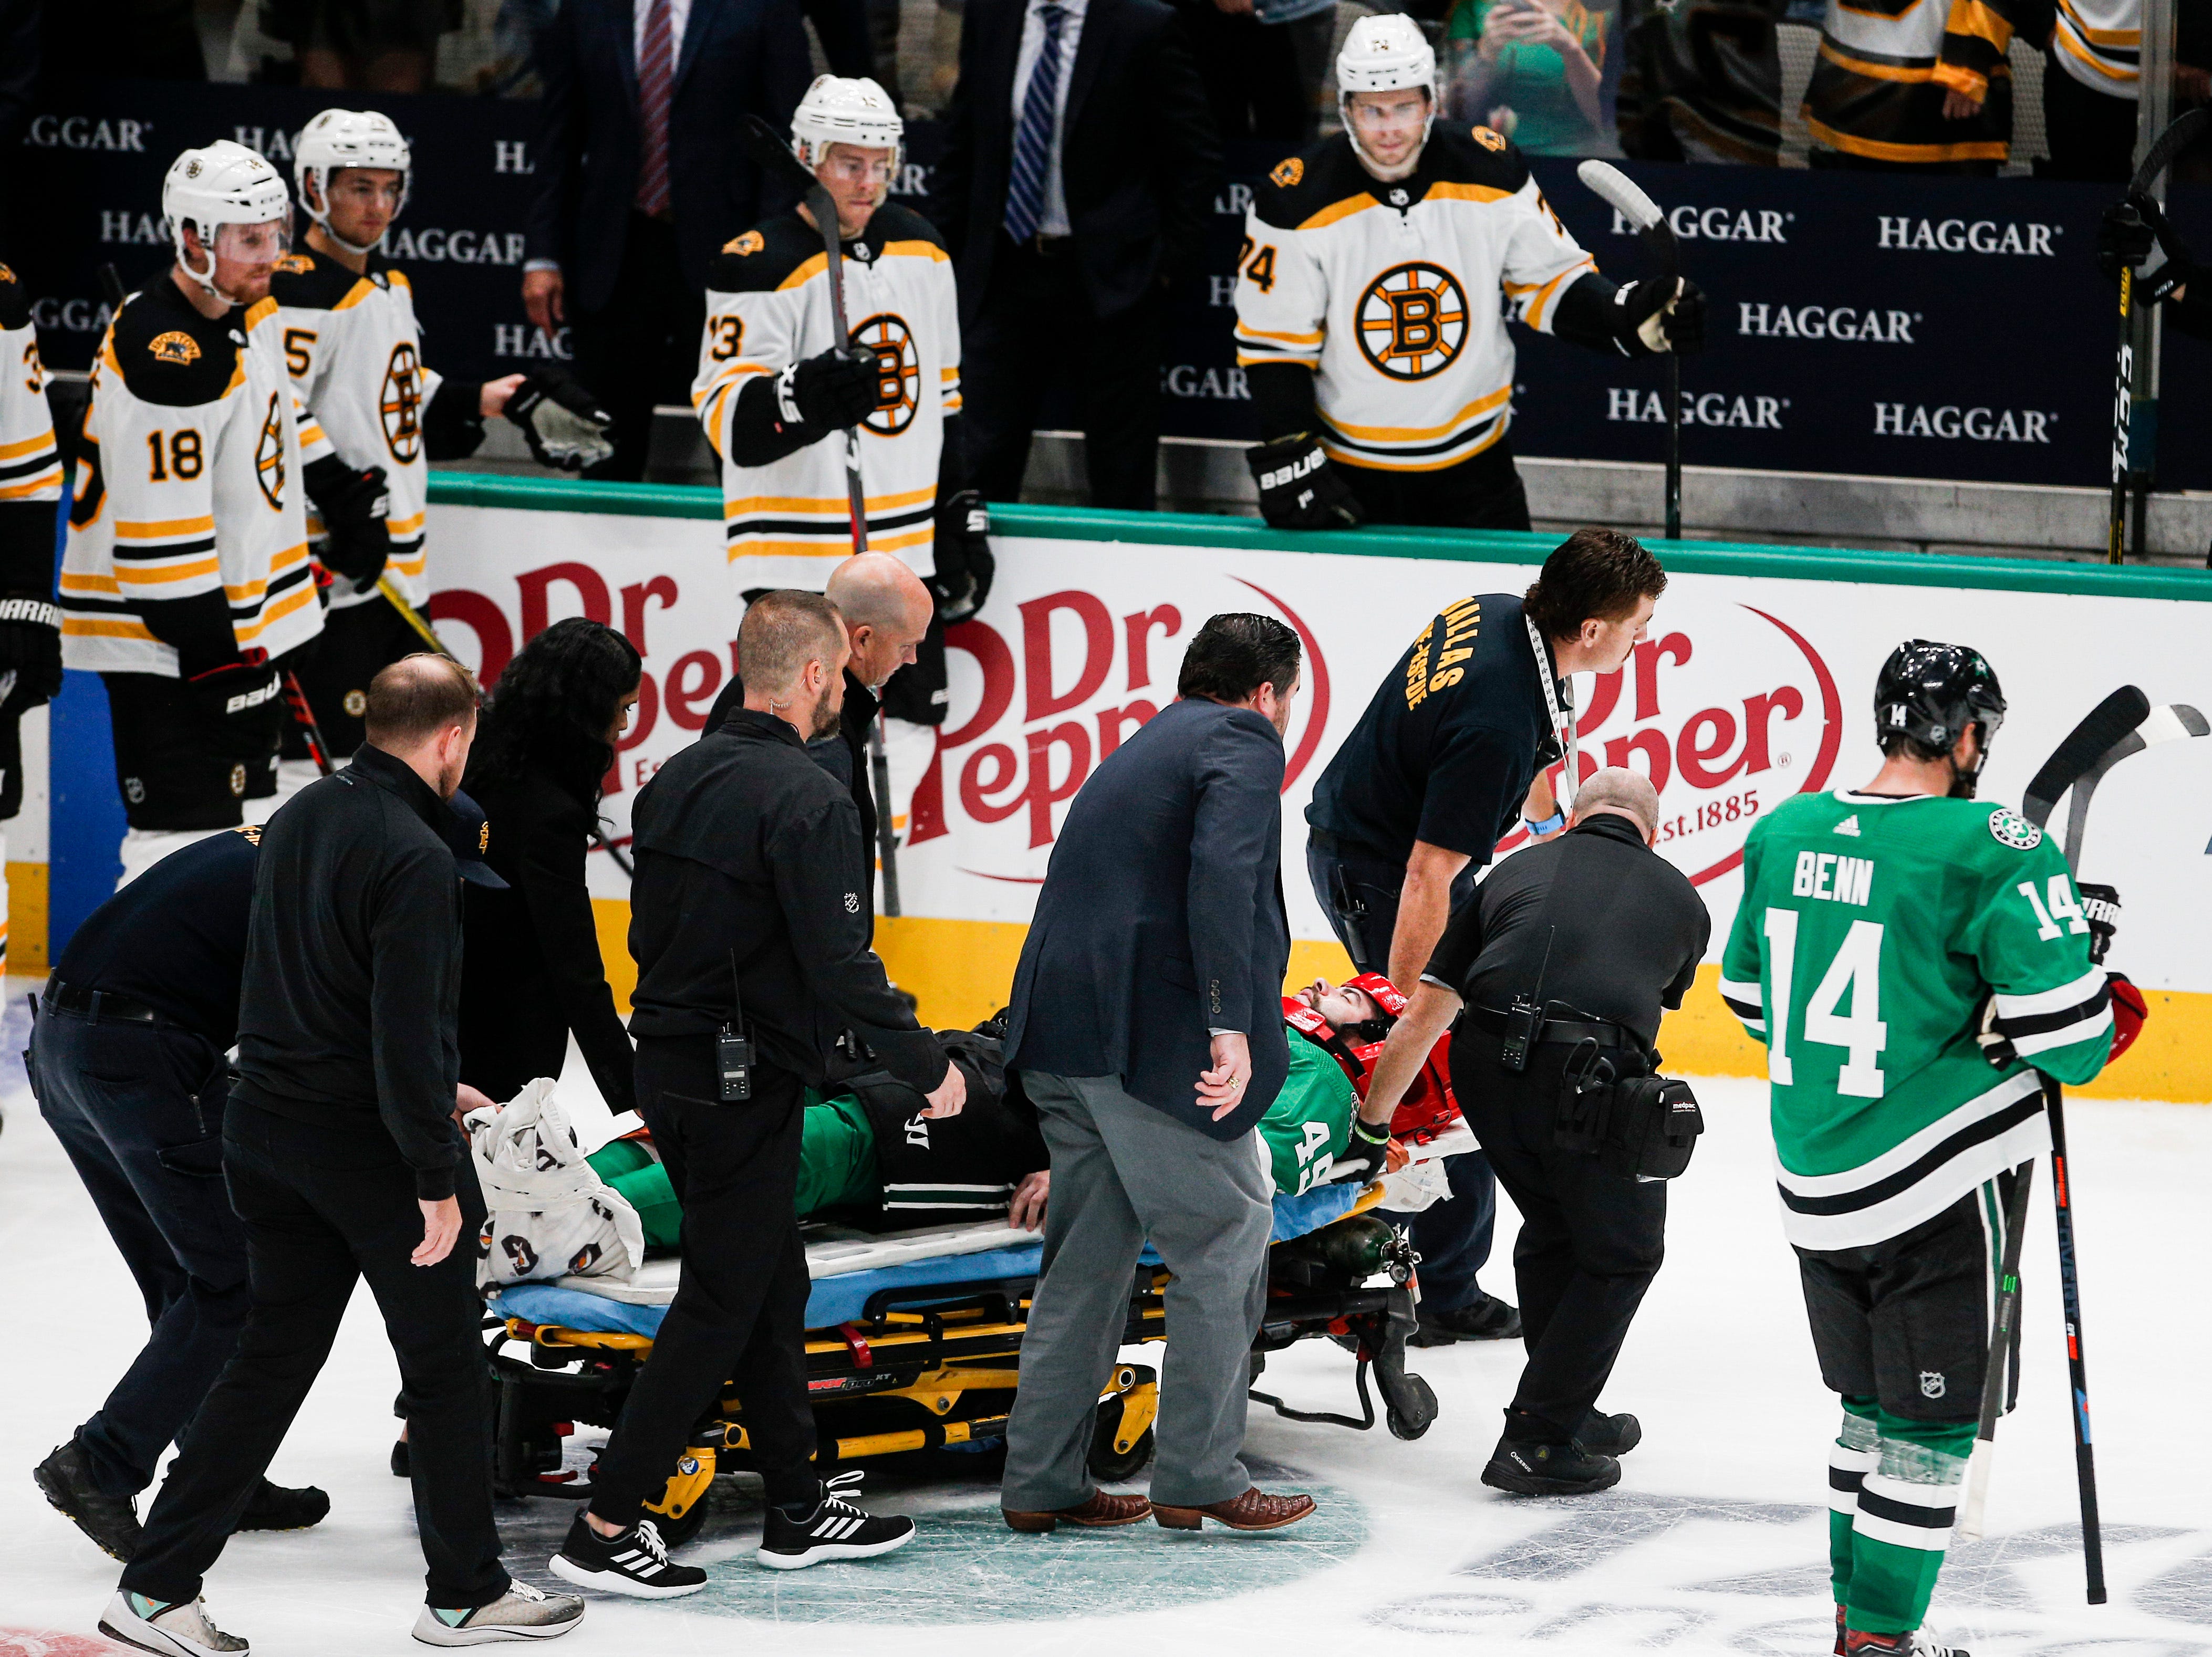 Agent rips broadcaster for saying Stars player's injury was a 'little bit of bad hockey karma'